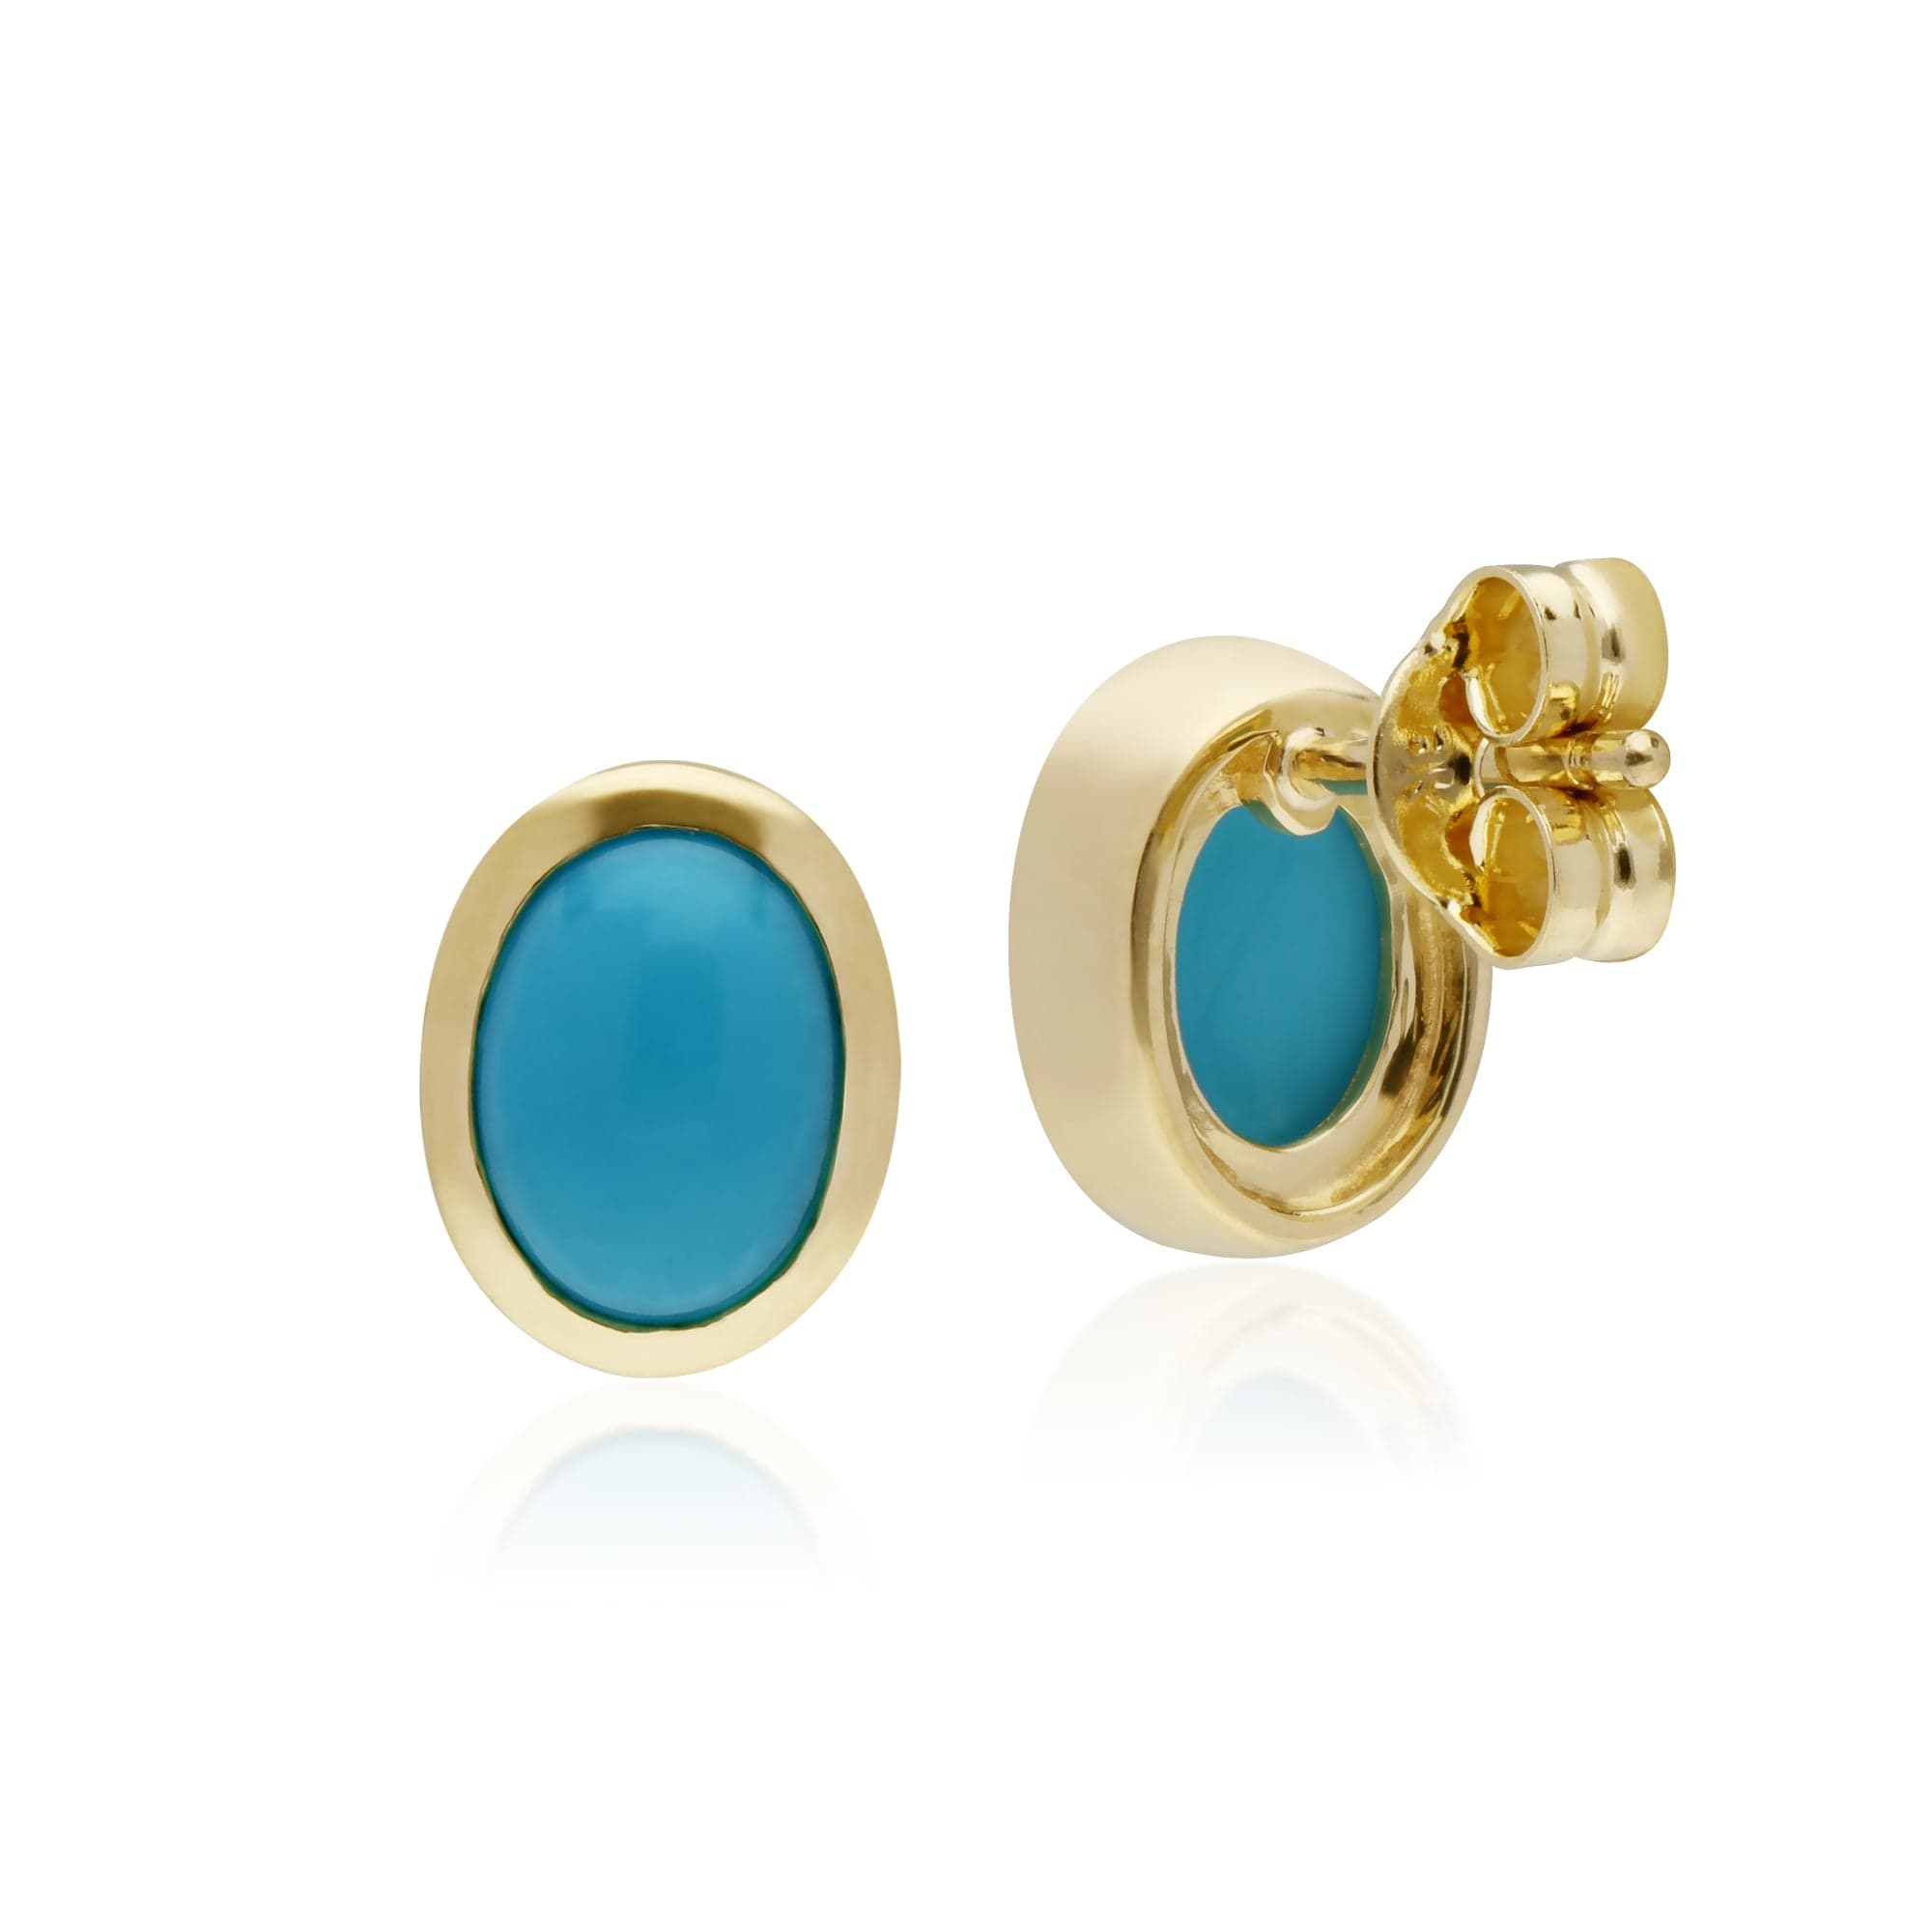 16661 Classic Oval Turquoise Stud Earrings in 9ct Yellow Gold 7x6mm 3